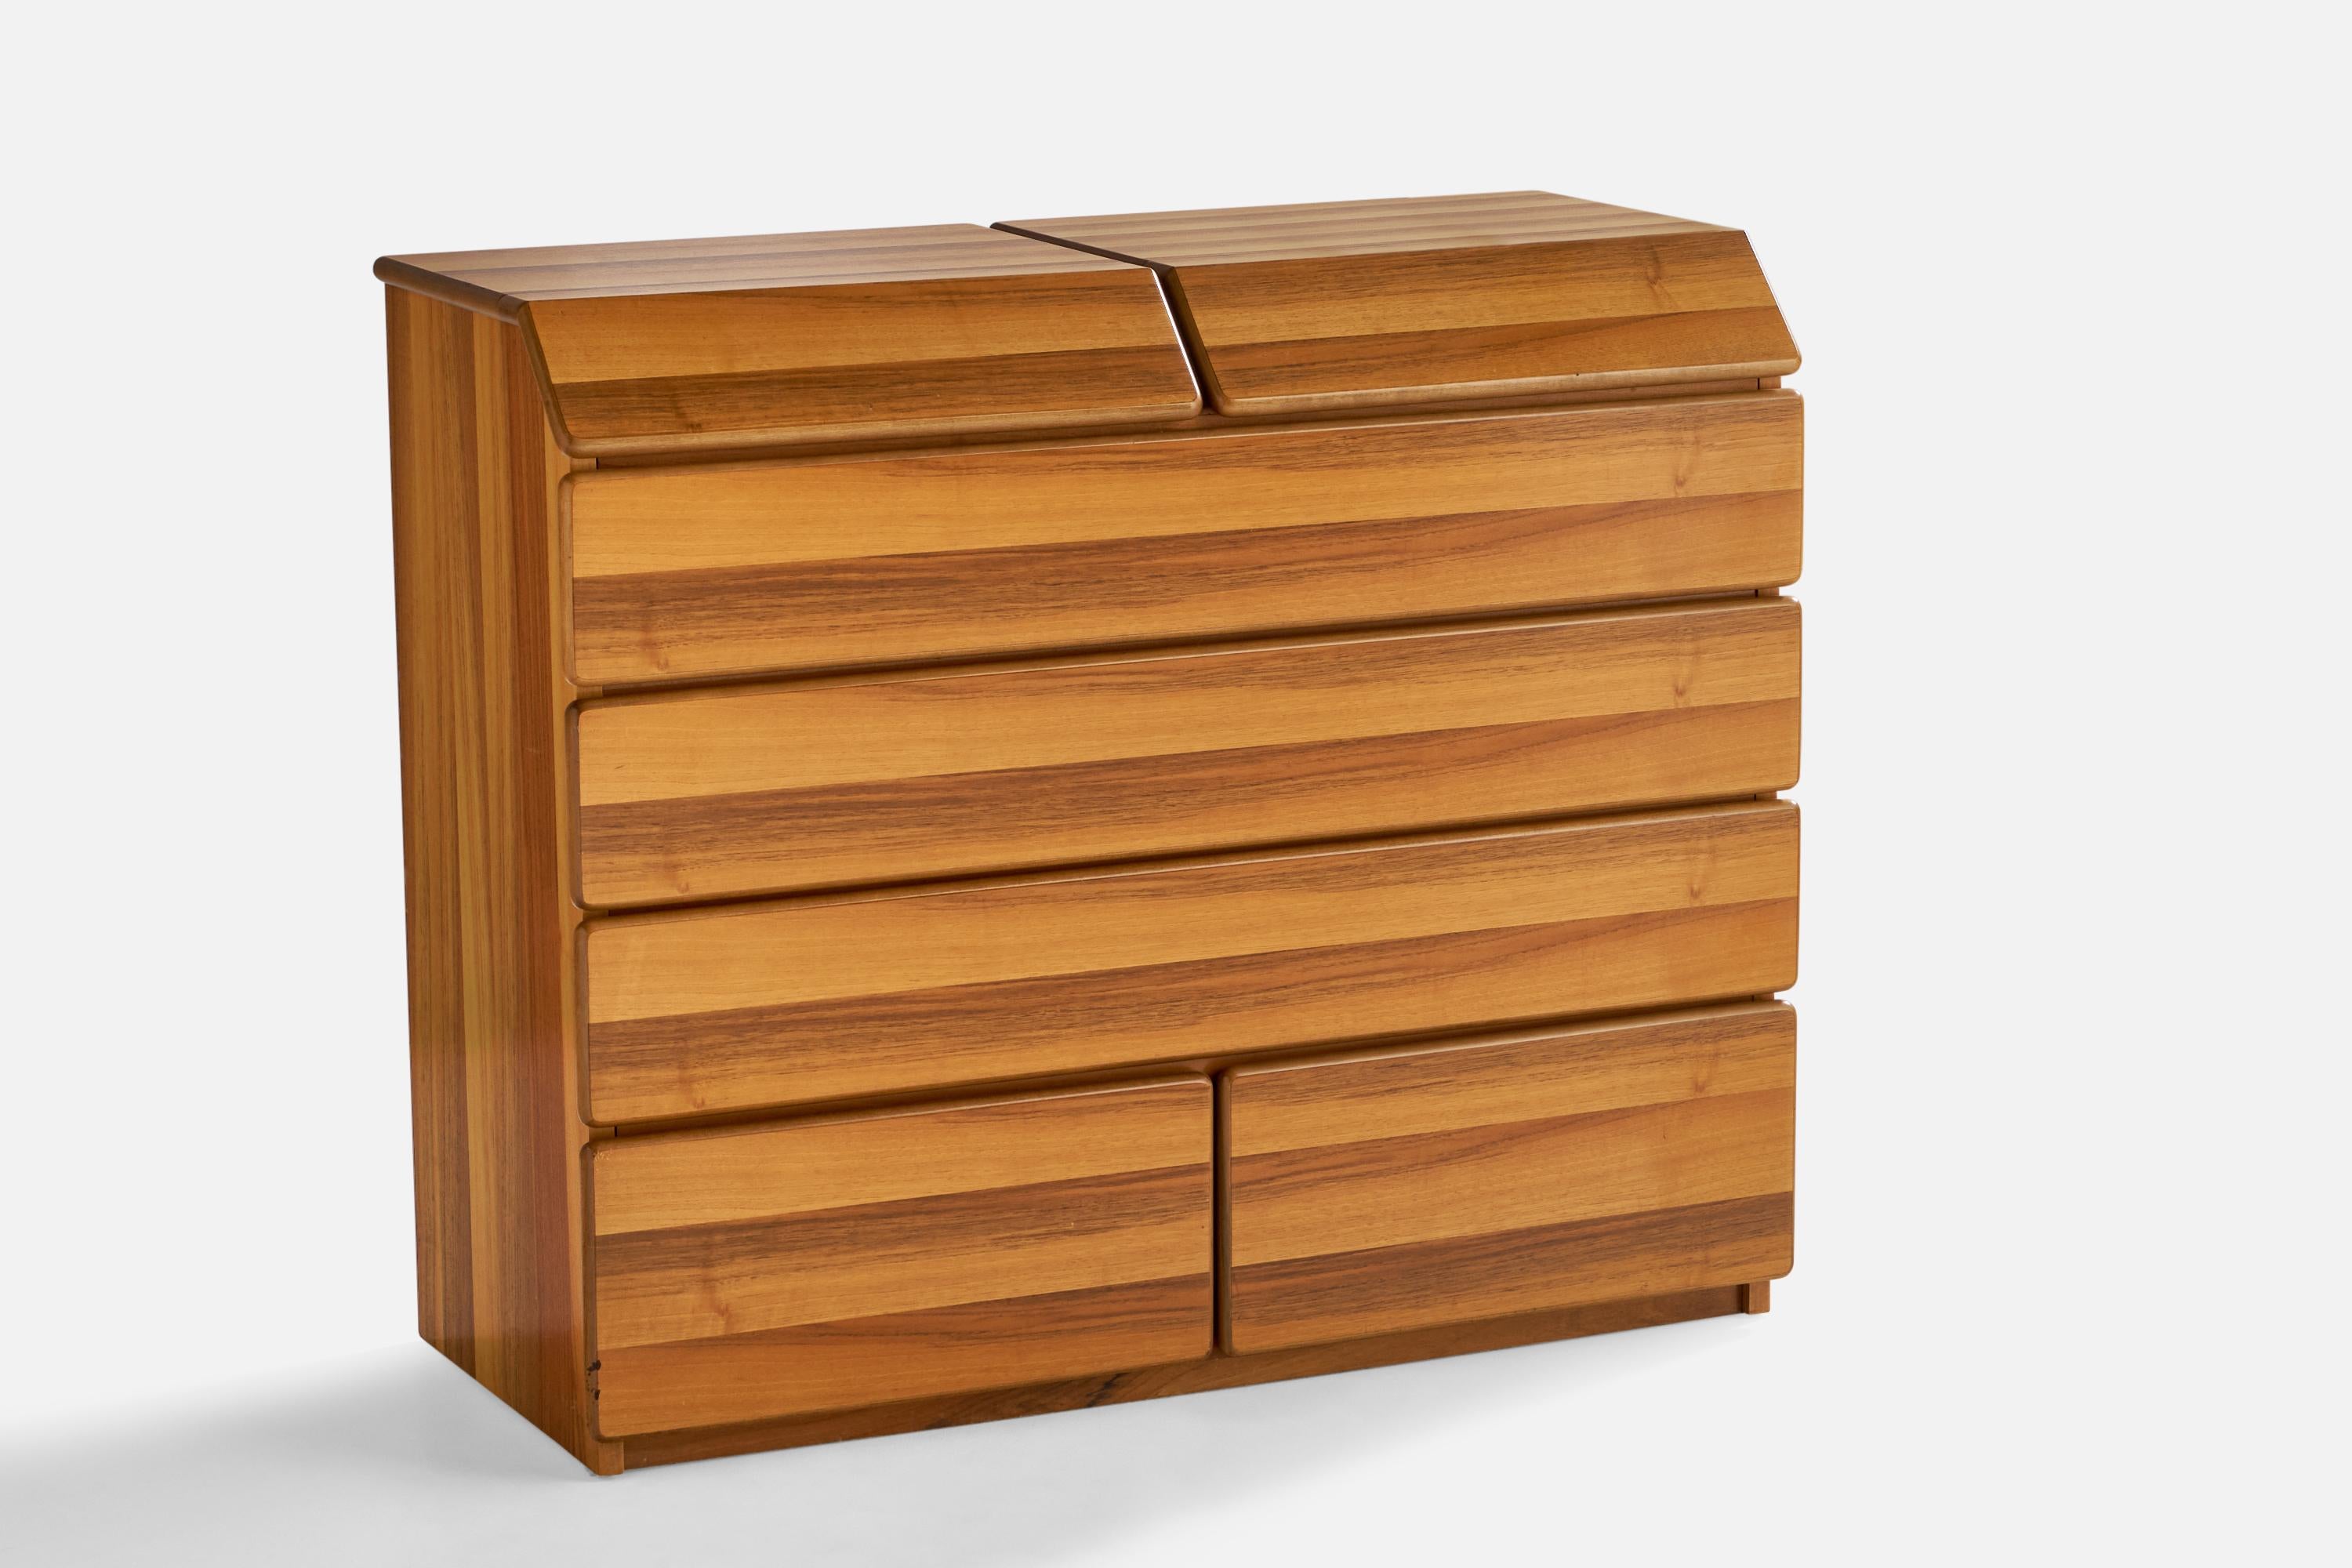 Mobilgirgi, Chest of Drawers, Spalting Wood, Italy, 1970s For Sale 3